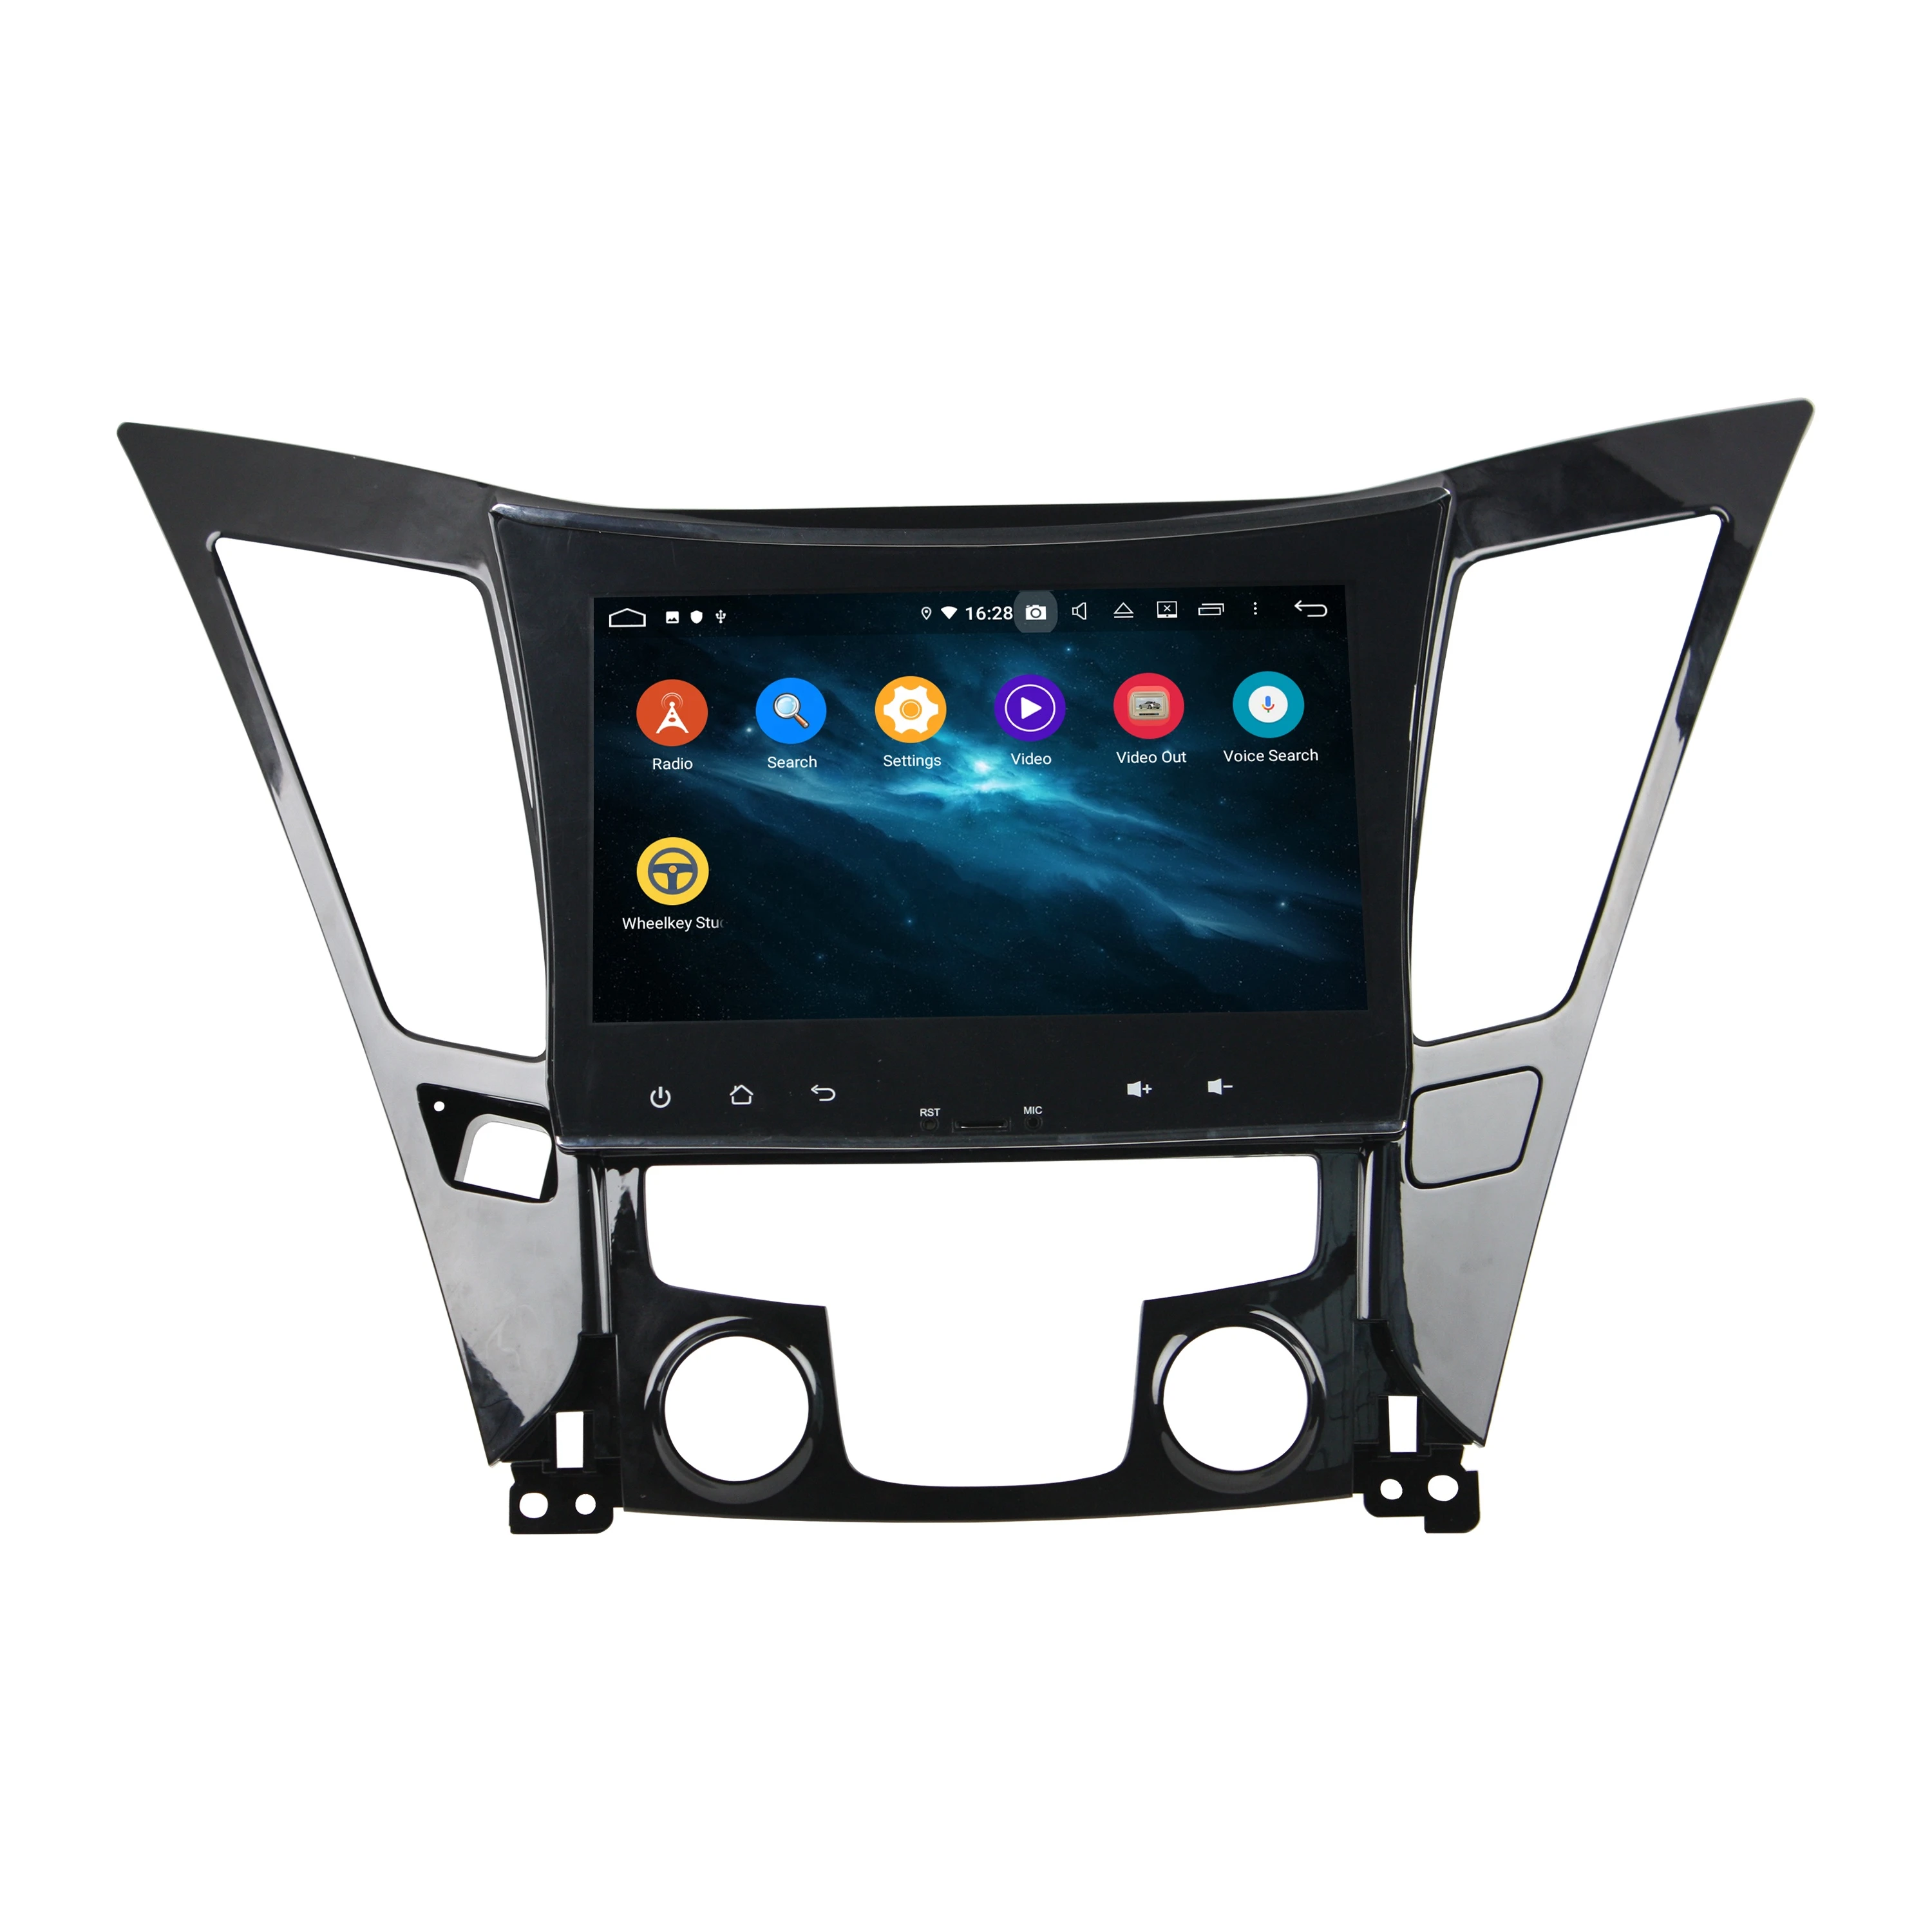 KD-9202 Car Multimedia Radio Video Player for Sonata 2011-2013 support WIFI/DSP/DVR/GPS/OBD/Carplay with 9 Inch Touch Screen